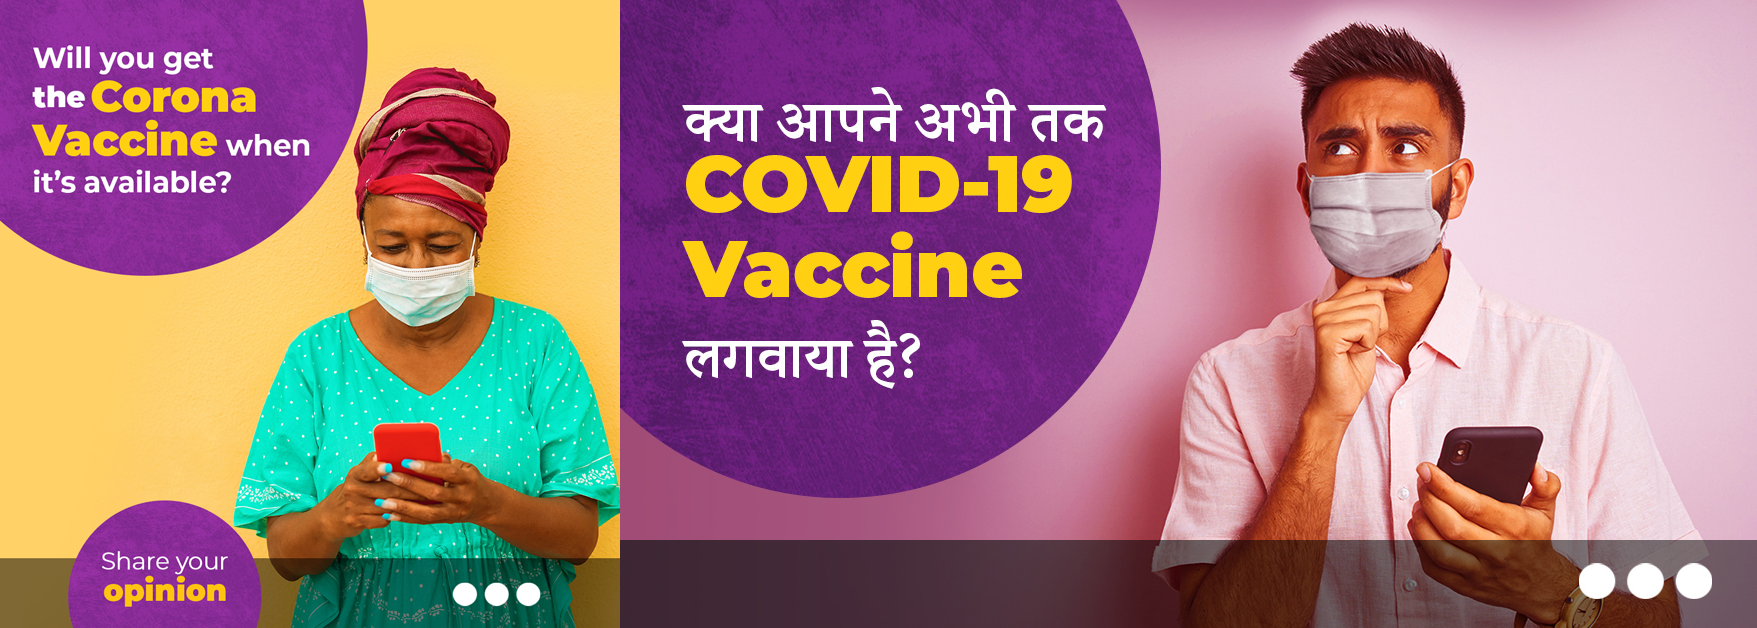 LEFT: Example Kenyan ad from November 2020. RIGHT: Example Indian ad from May 2021 ('Have you received a COVID-19 vaccination yet?').